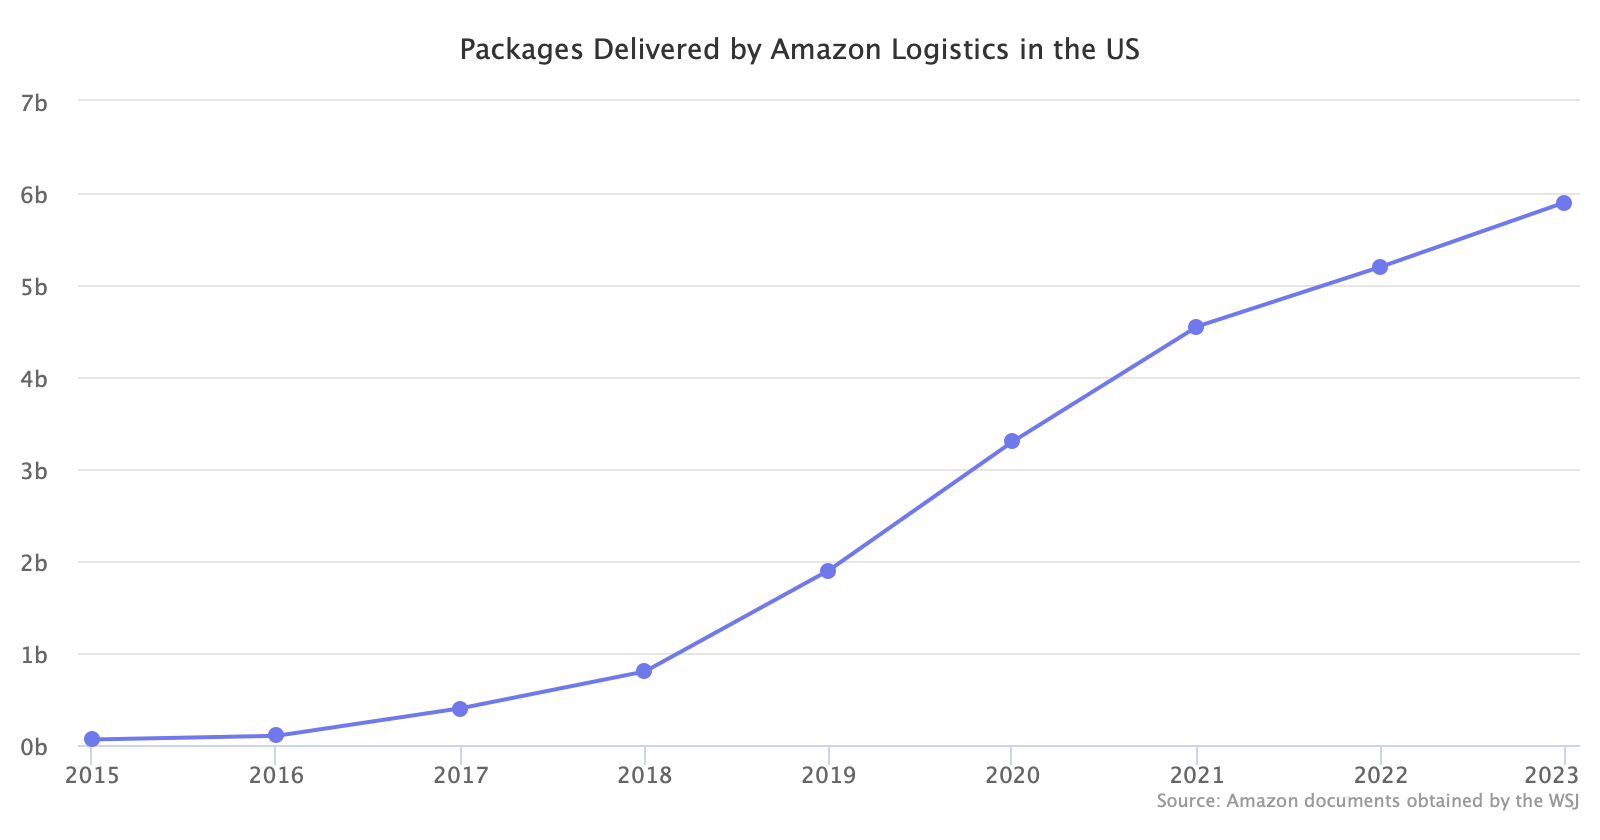 'Packages Delivered by Amazon Logistics in the U.S.